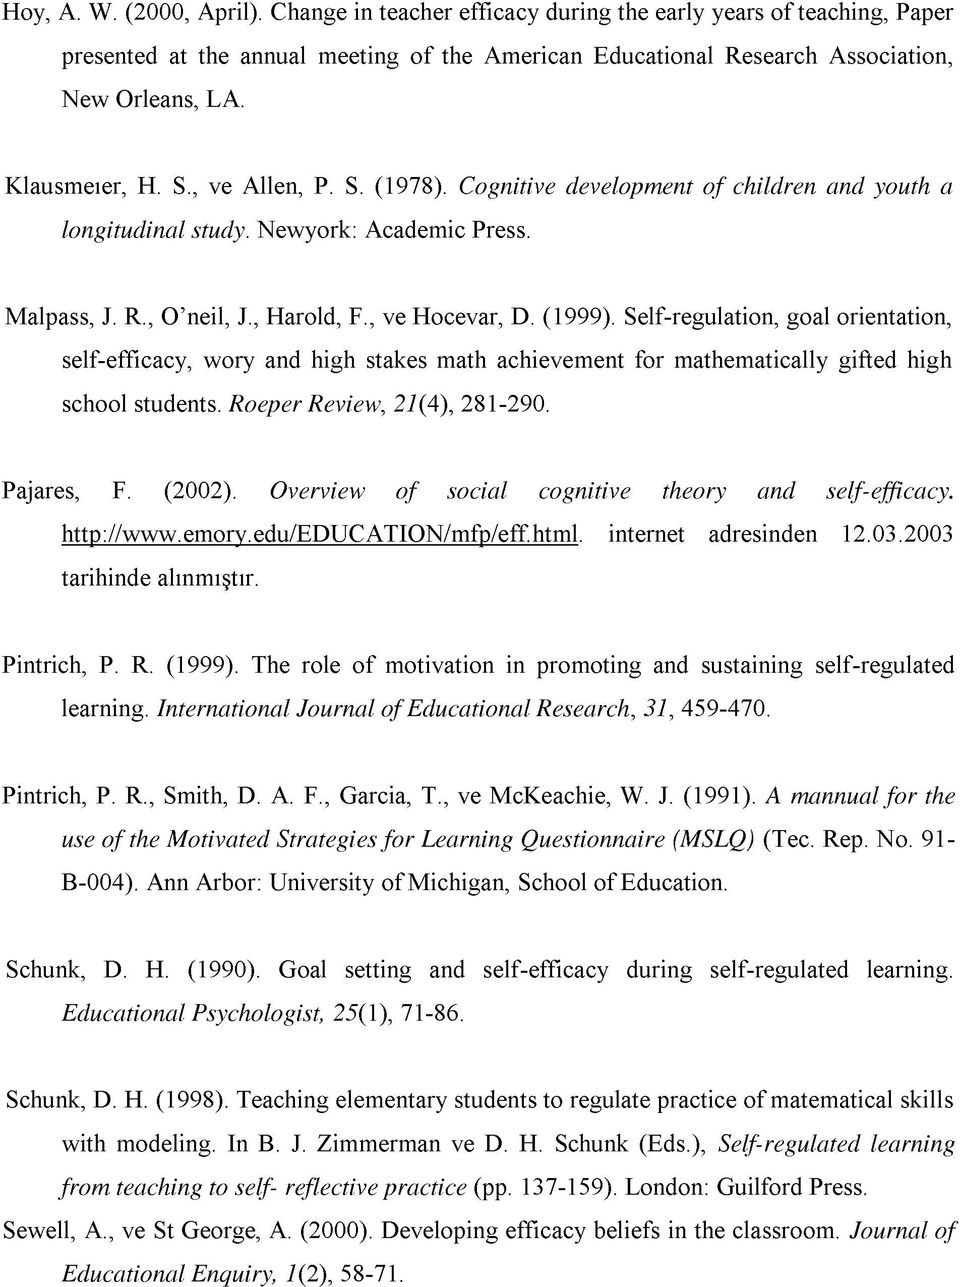 Self-regulation, goal orientation, self-efficacy, wory and high stakes math achievement for mathematically gifted high school students. Roeper Review, 21(4), 281-290. Pajares, F. (2002).